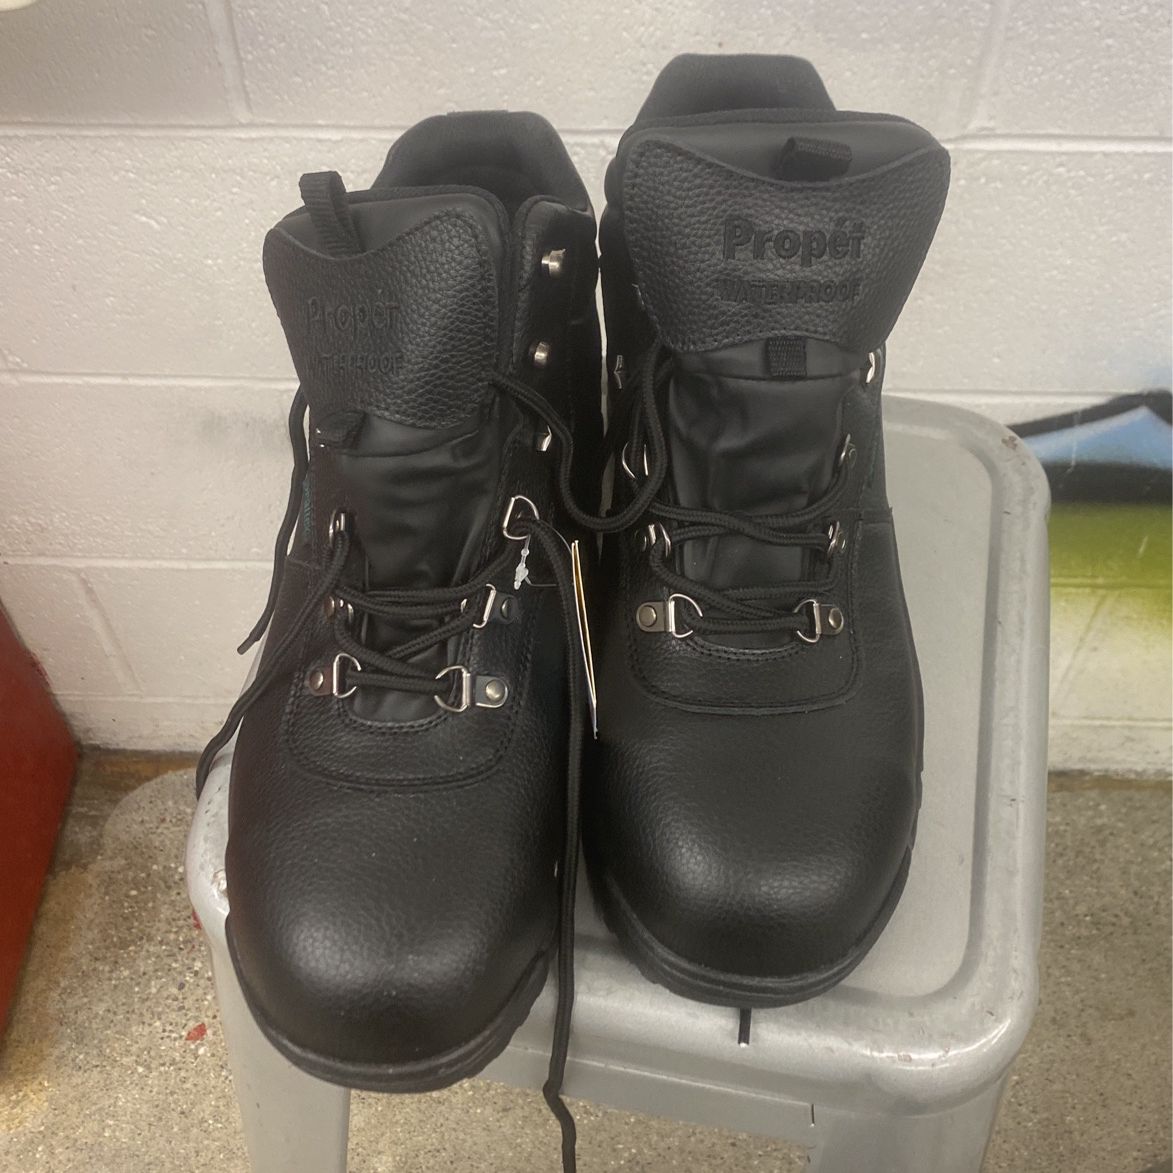 Propei Waterproof Safety Boots Size 12